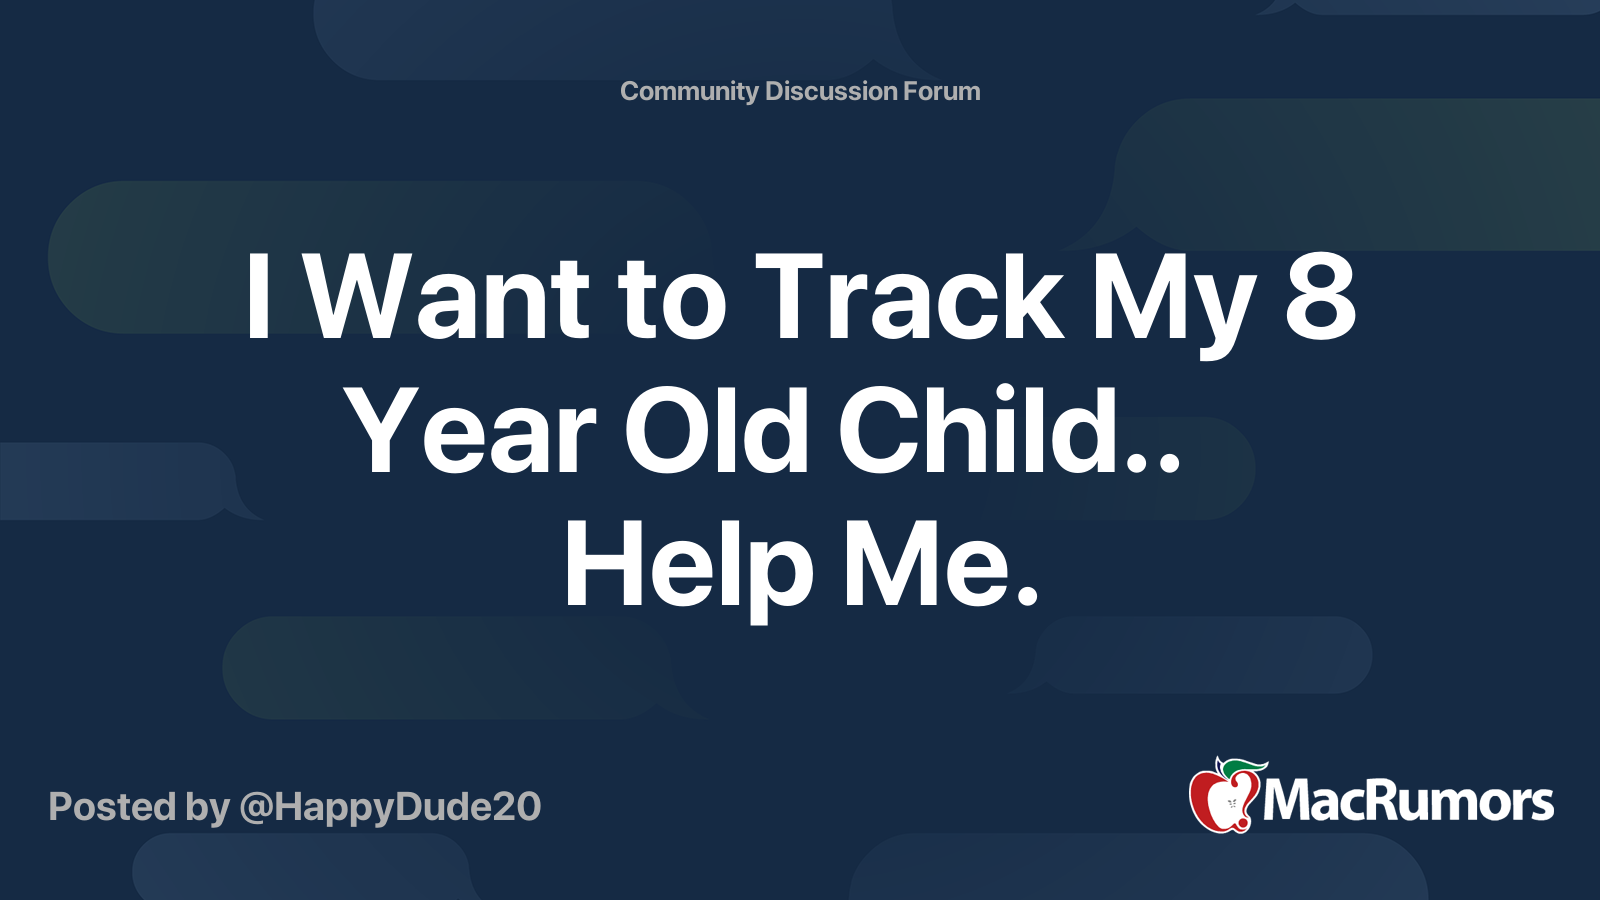 How can I track my 8 year old?